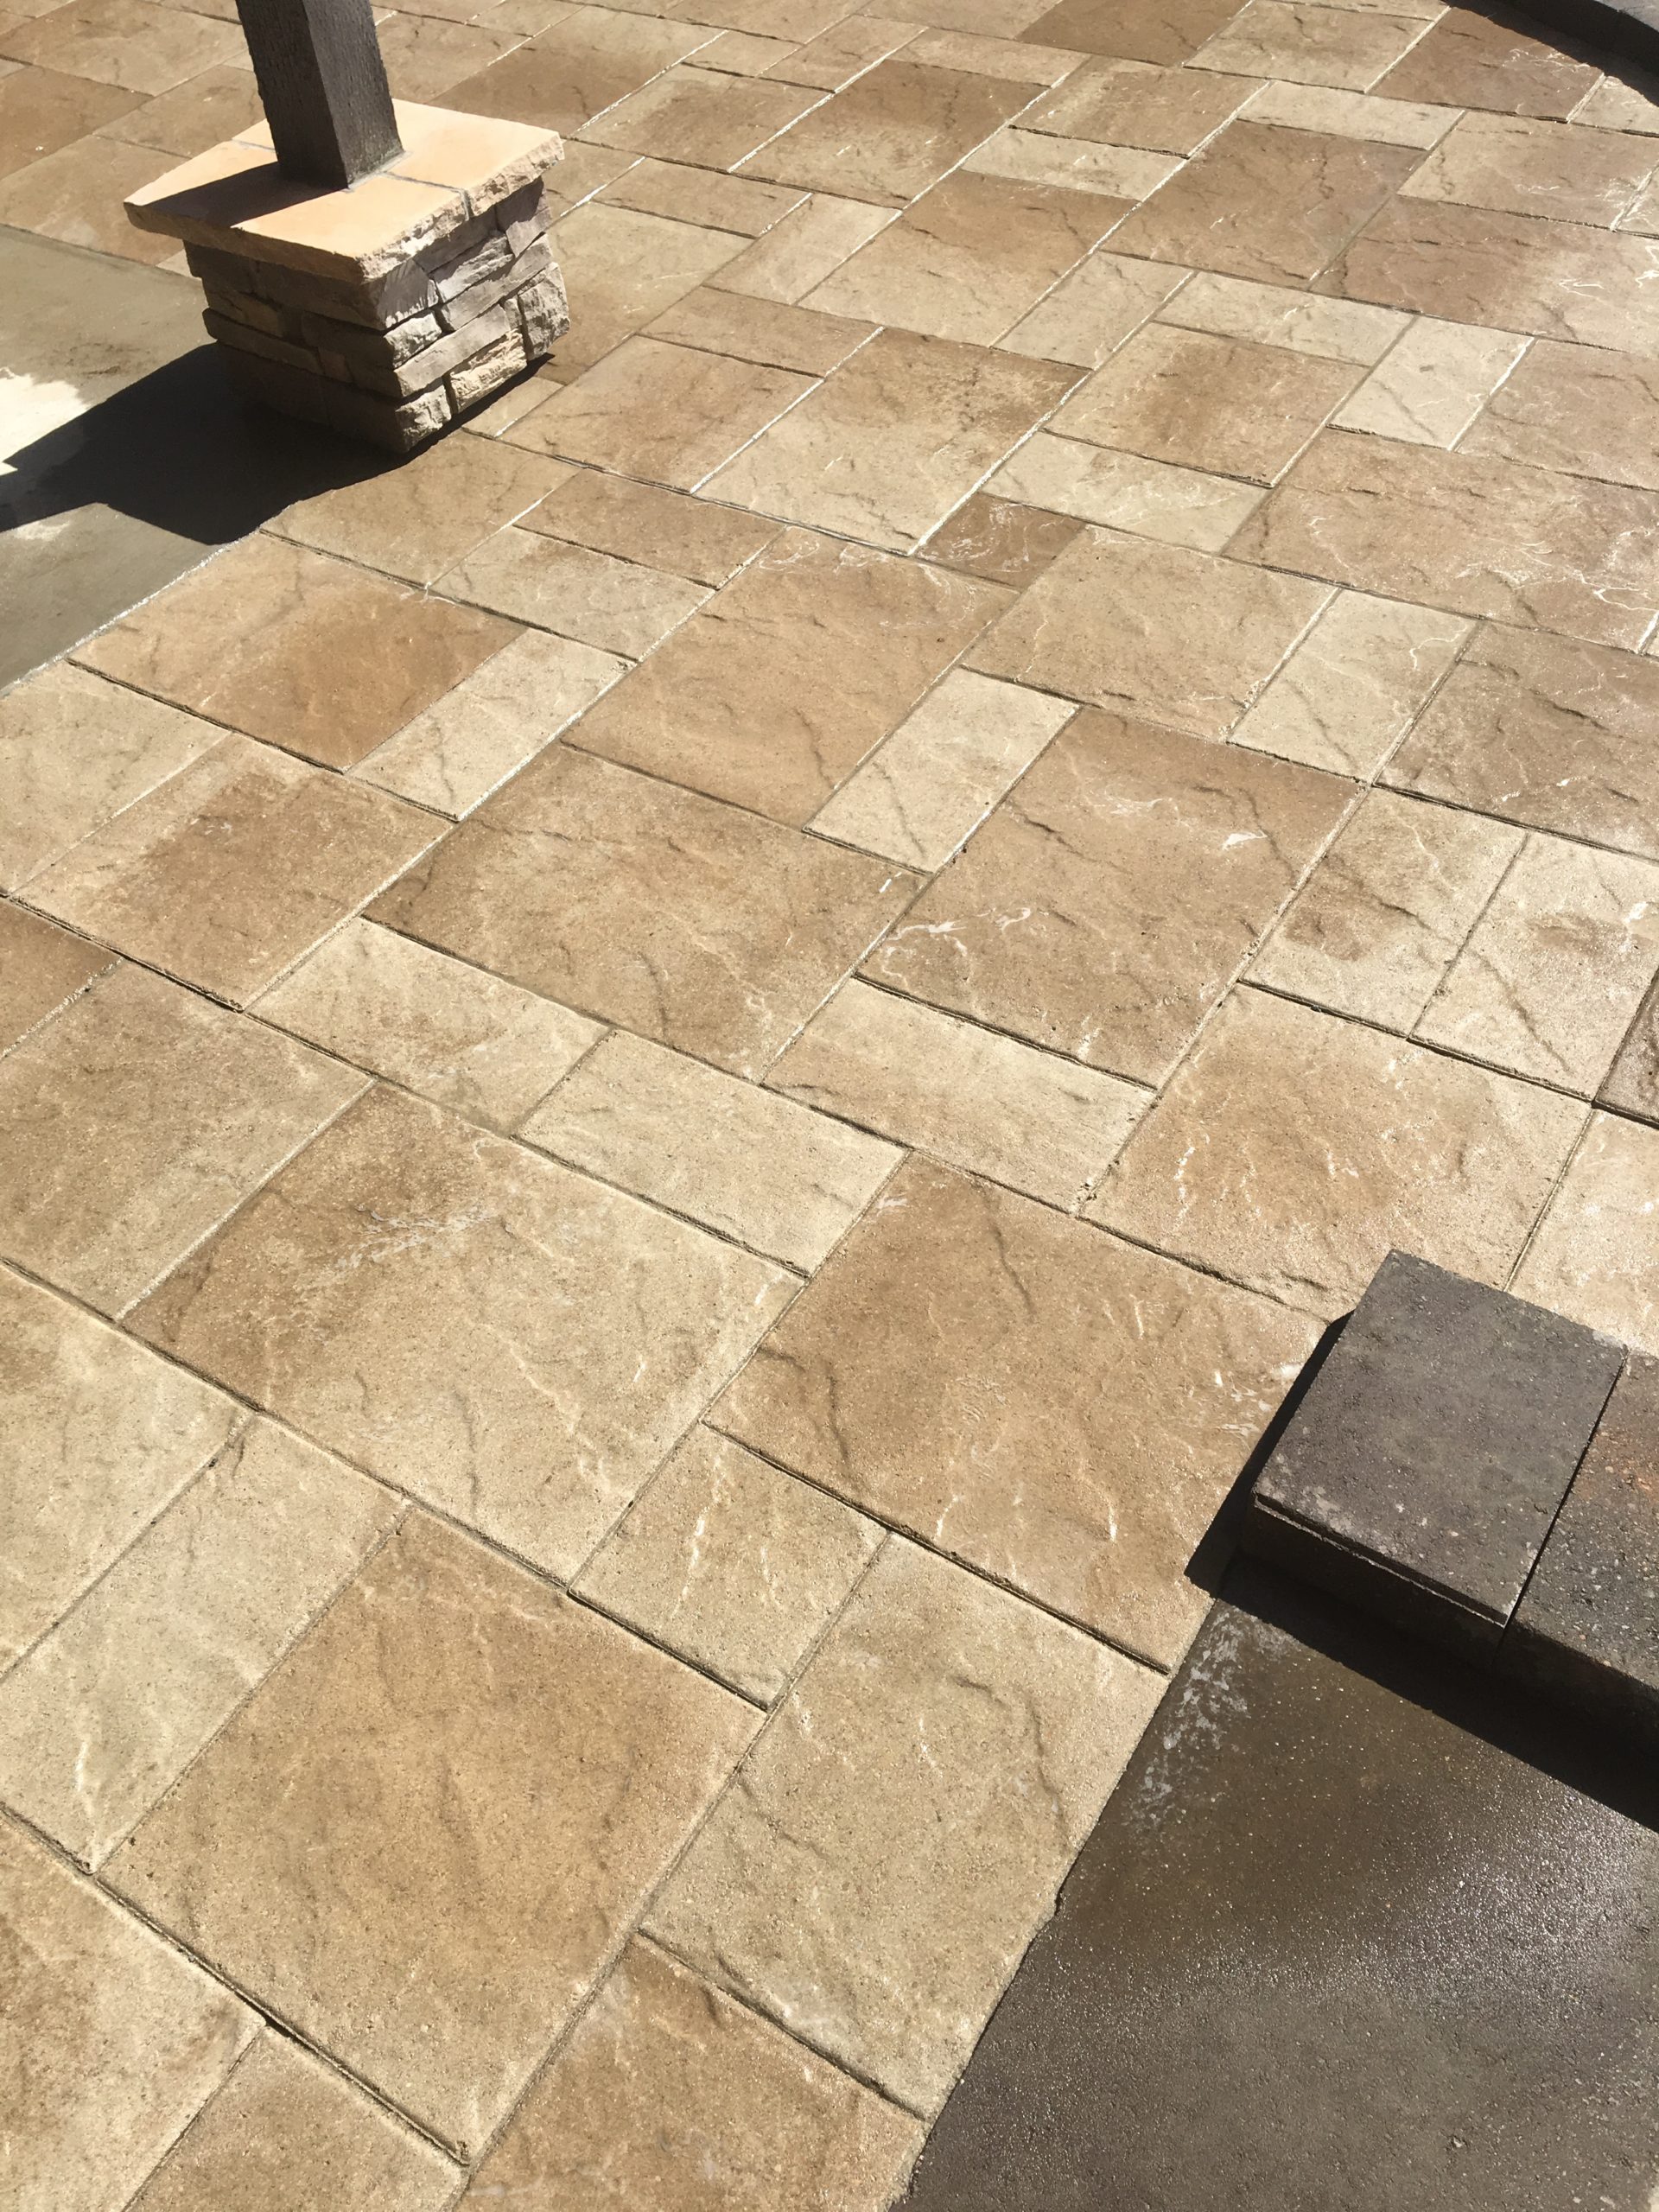 Mosaic of tan pavers for an outdoor pation